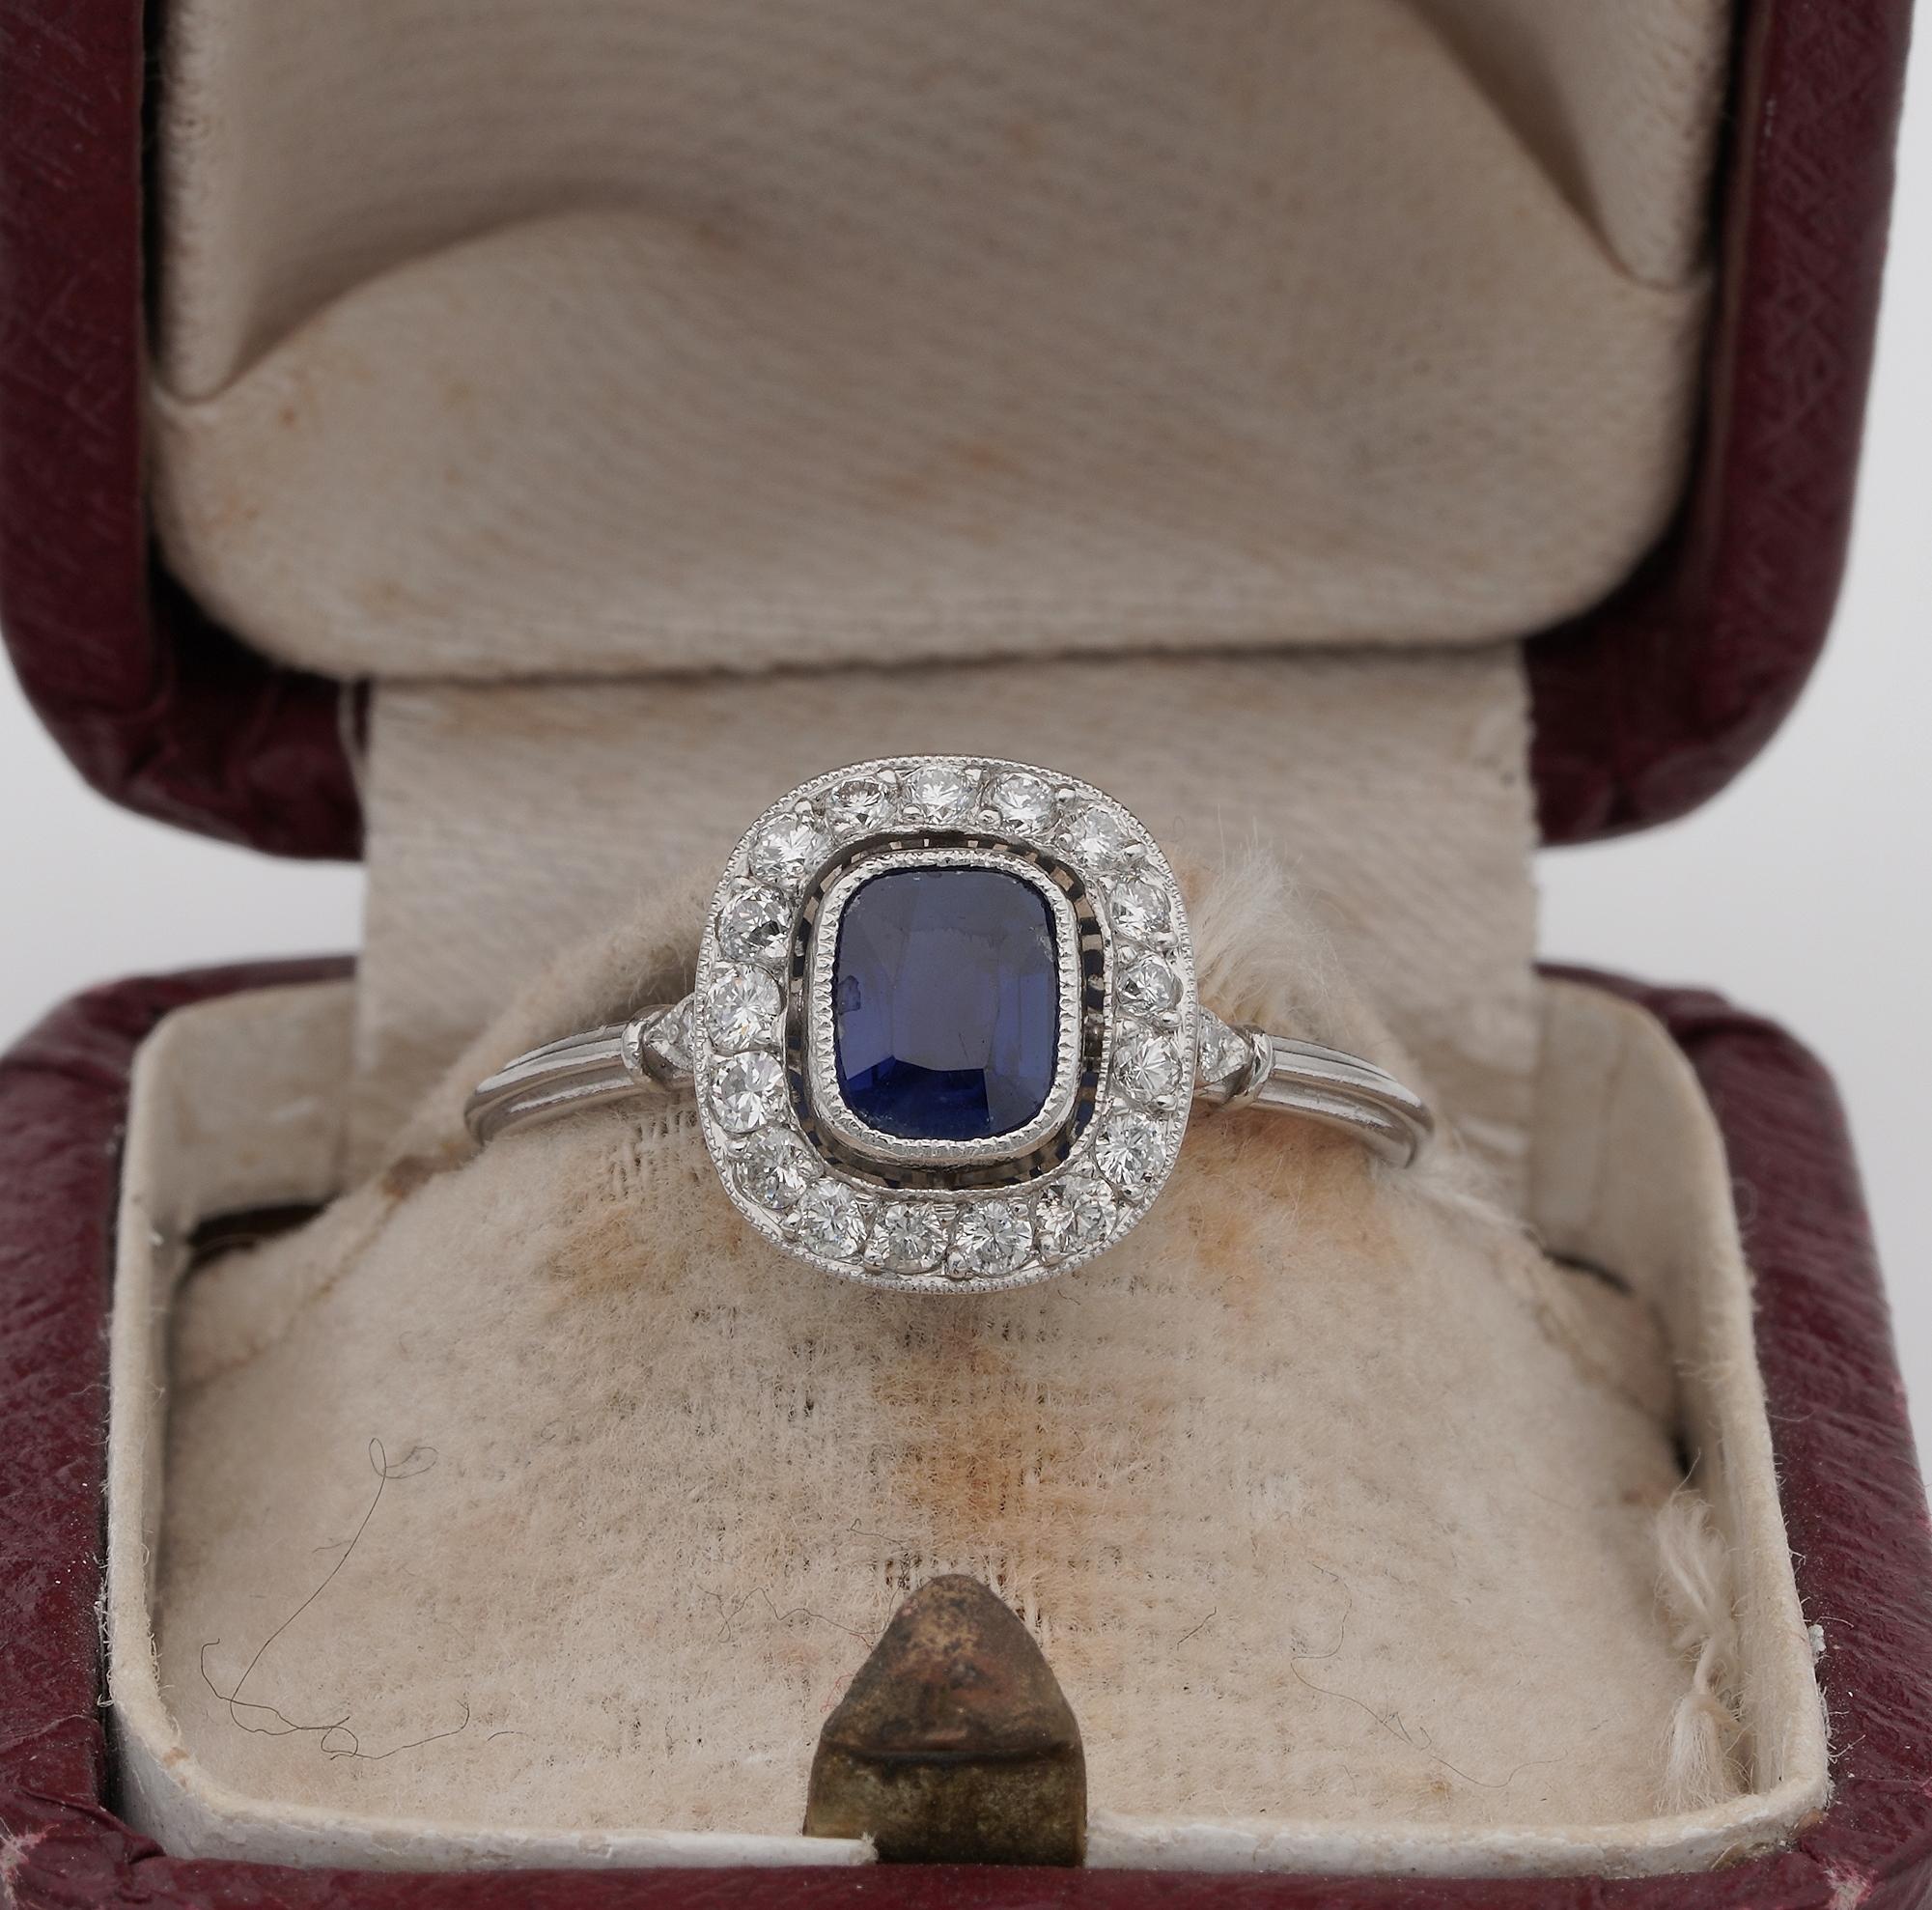 Art Deco Appeal

Authentic Art Deco engagement rings are currently the most asked for and desired period rings
This absolutely exquisite example is the epitome epitome of Art Deco desirable design for today lifestyle - and into the future
Superbly